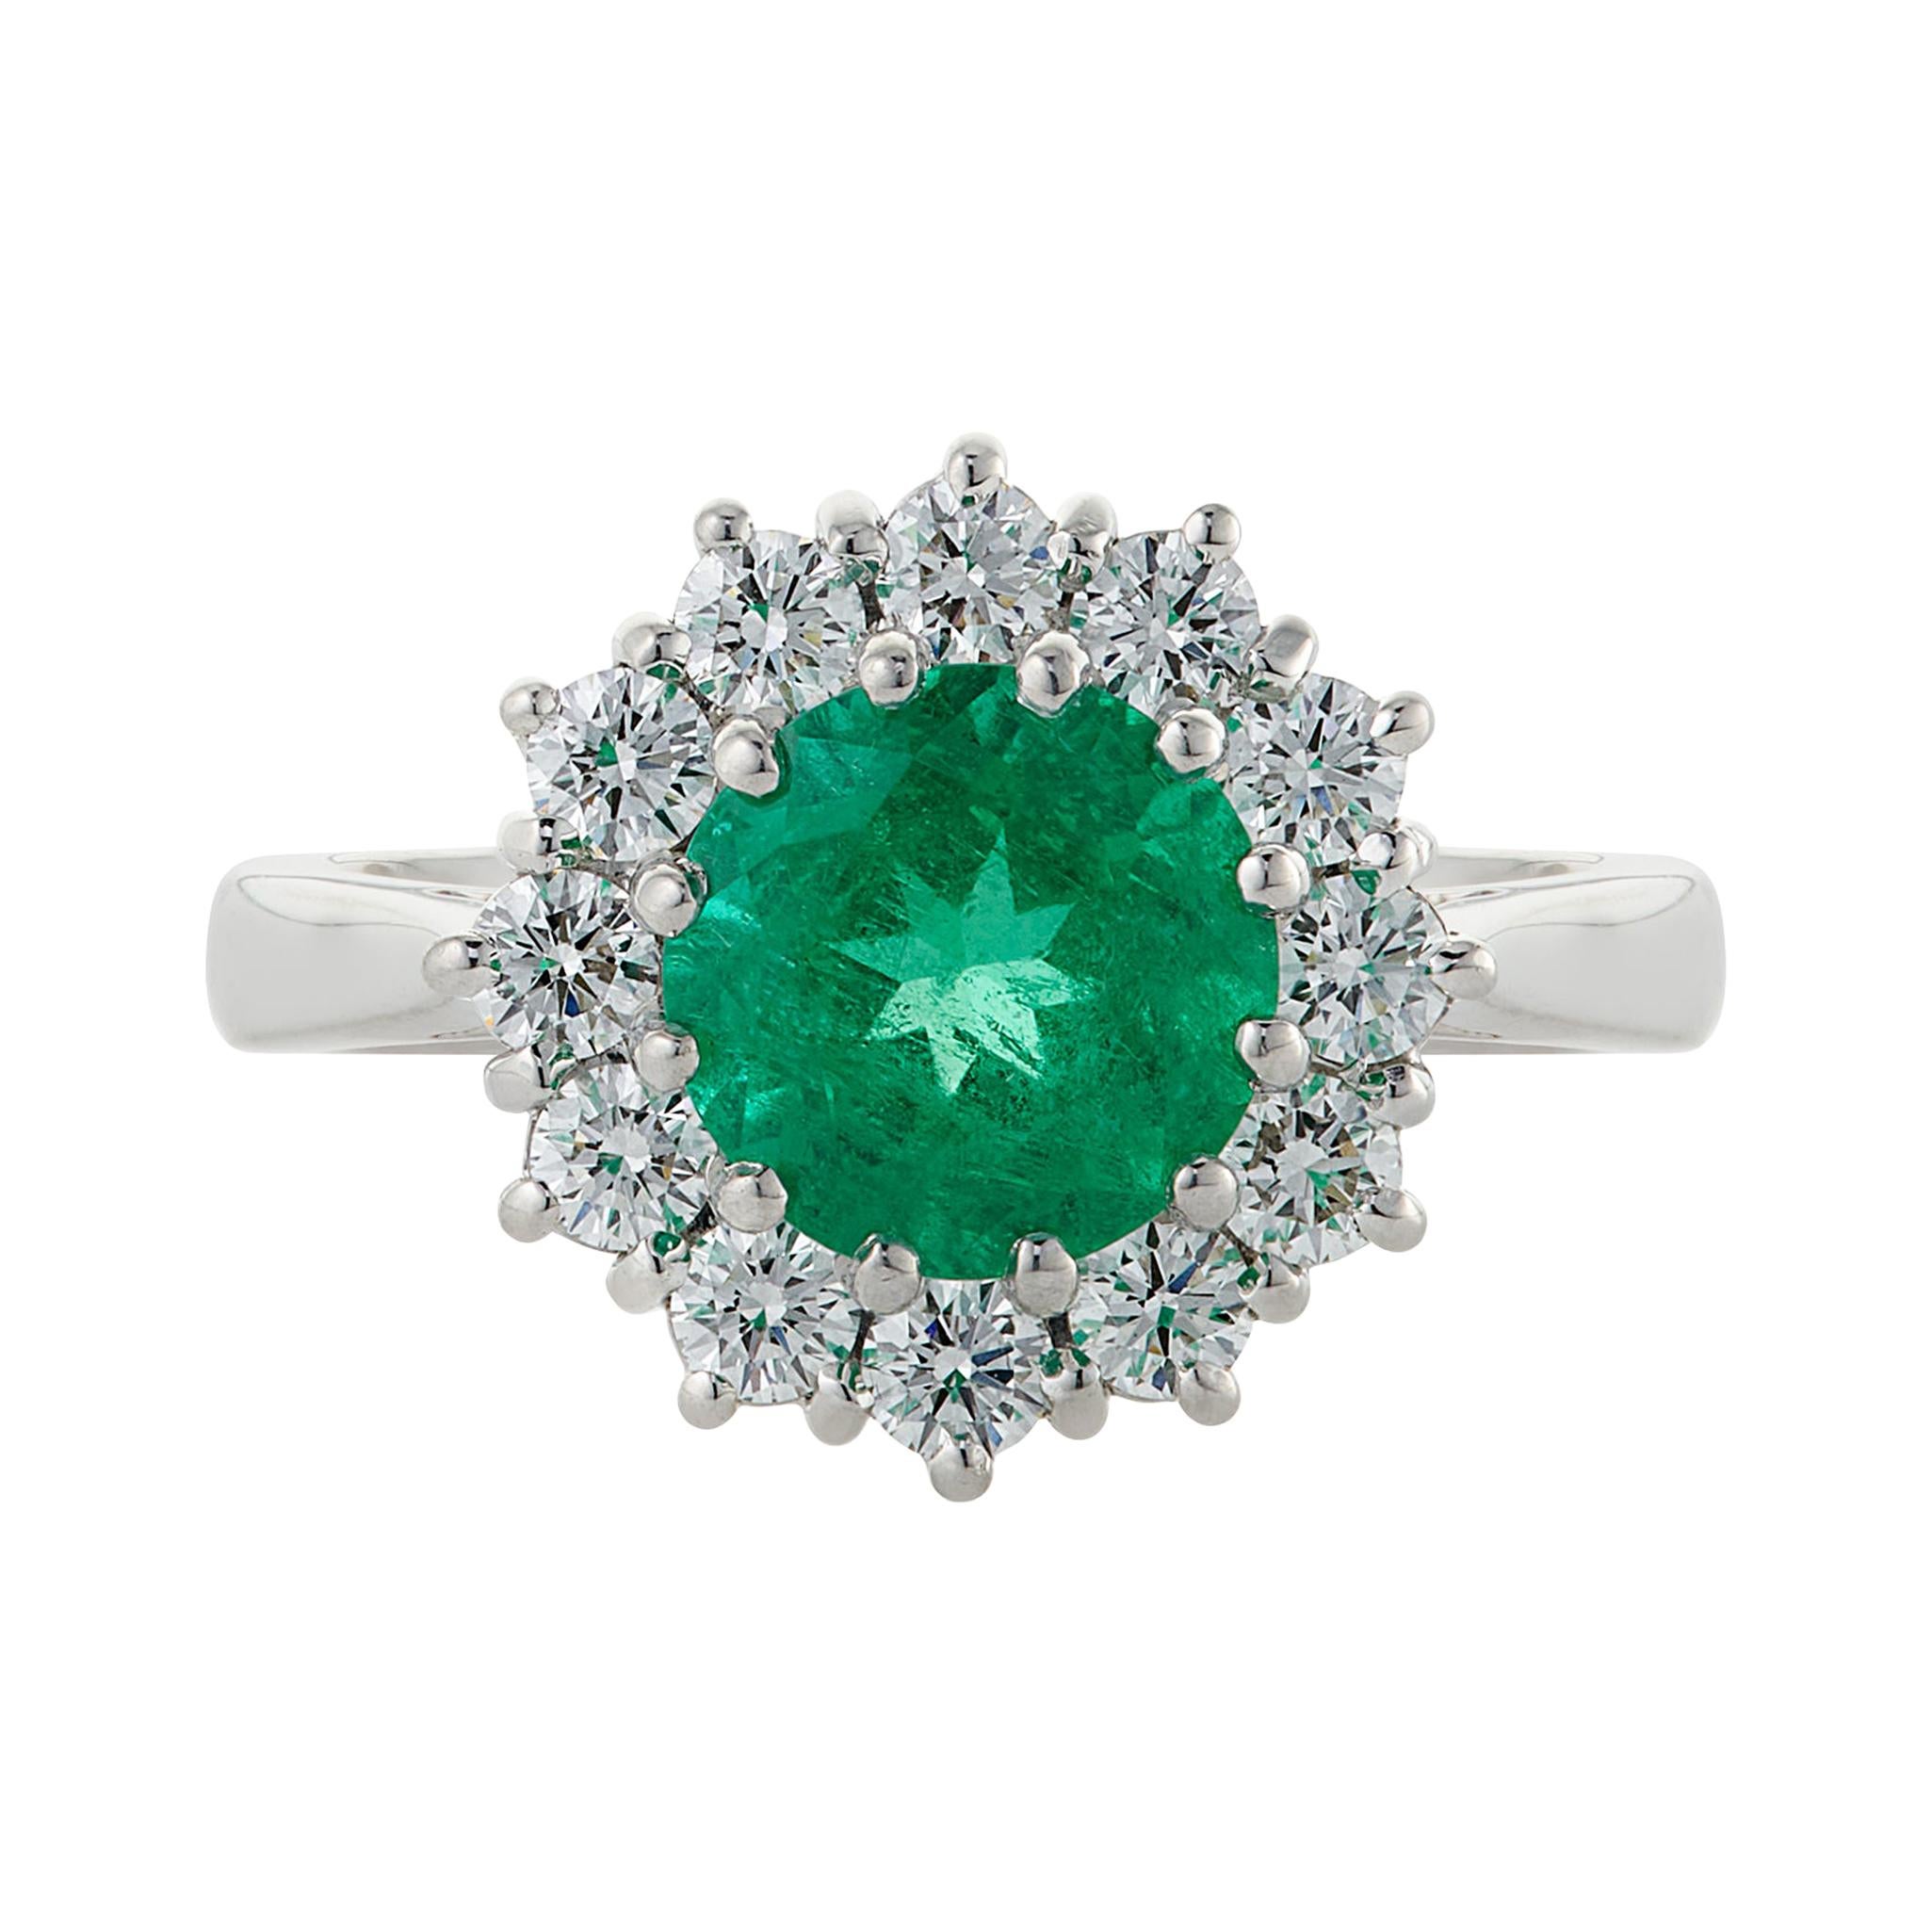 1.58 Carat Emerald and Diamond 18ct White Gold Cluster Ring